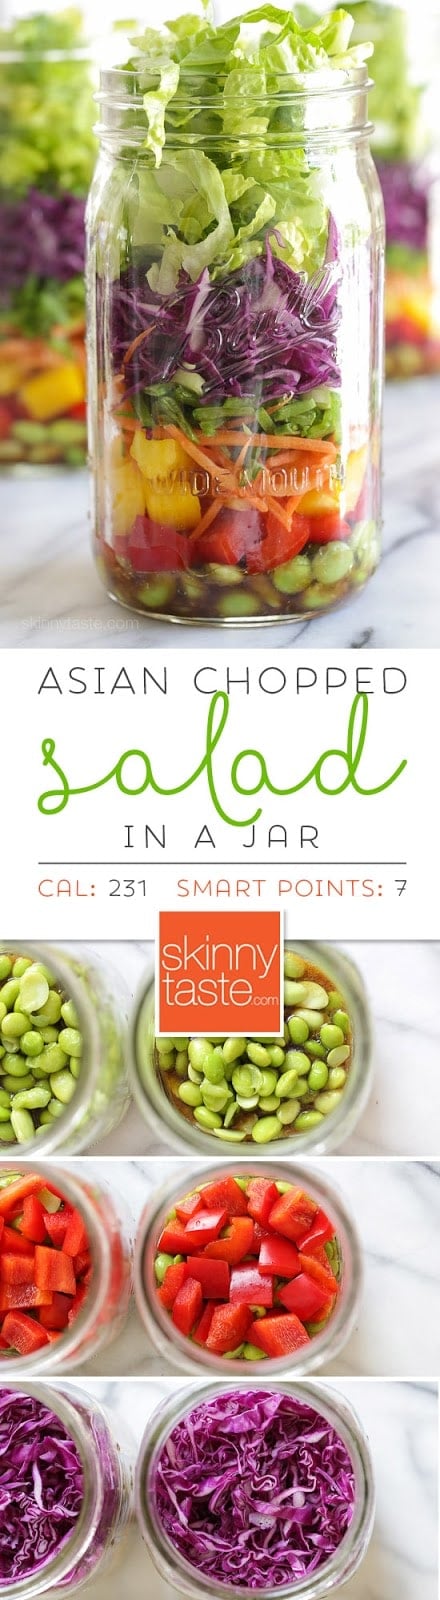 Asian Chopped Salad with Sesame Soy Vinaigrette (In a Jar) – perfect for lunch on the go! Weight Watchers Smart Points: 7 Calories: 231